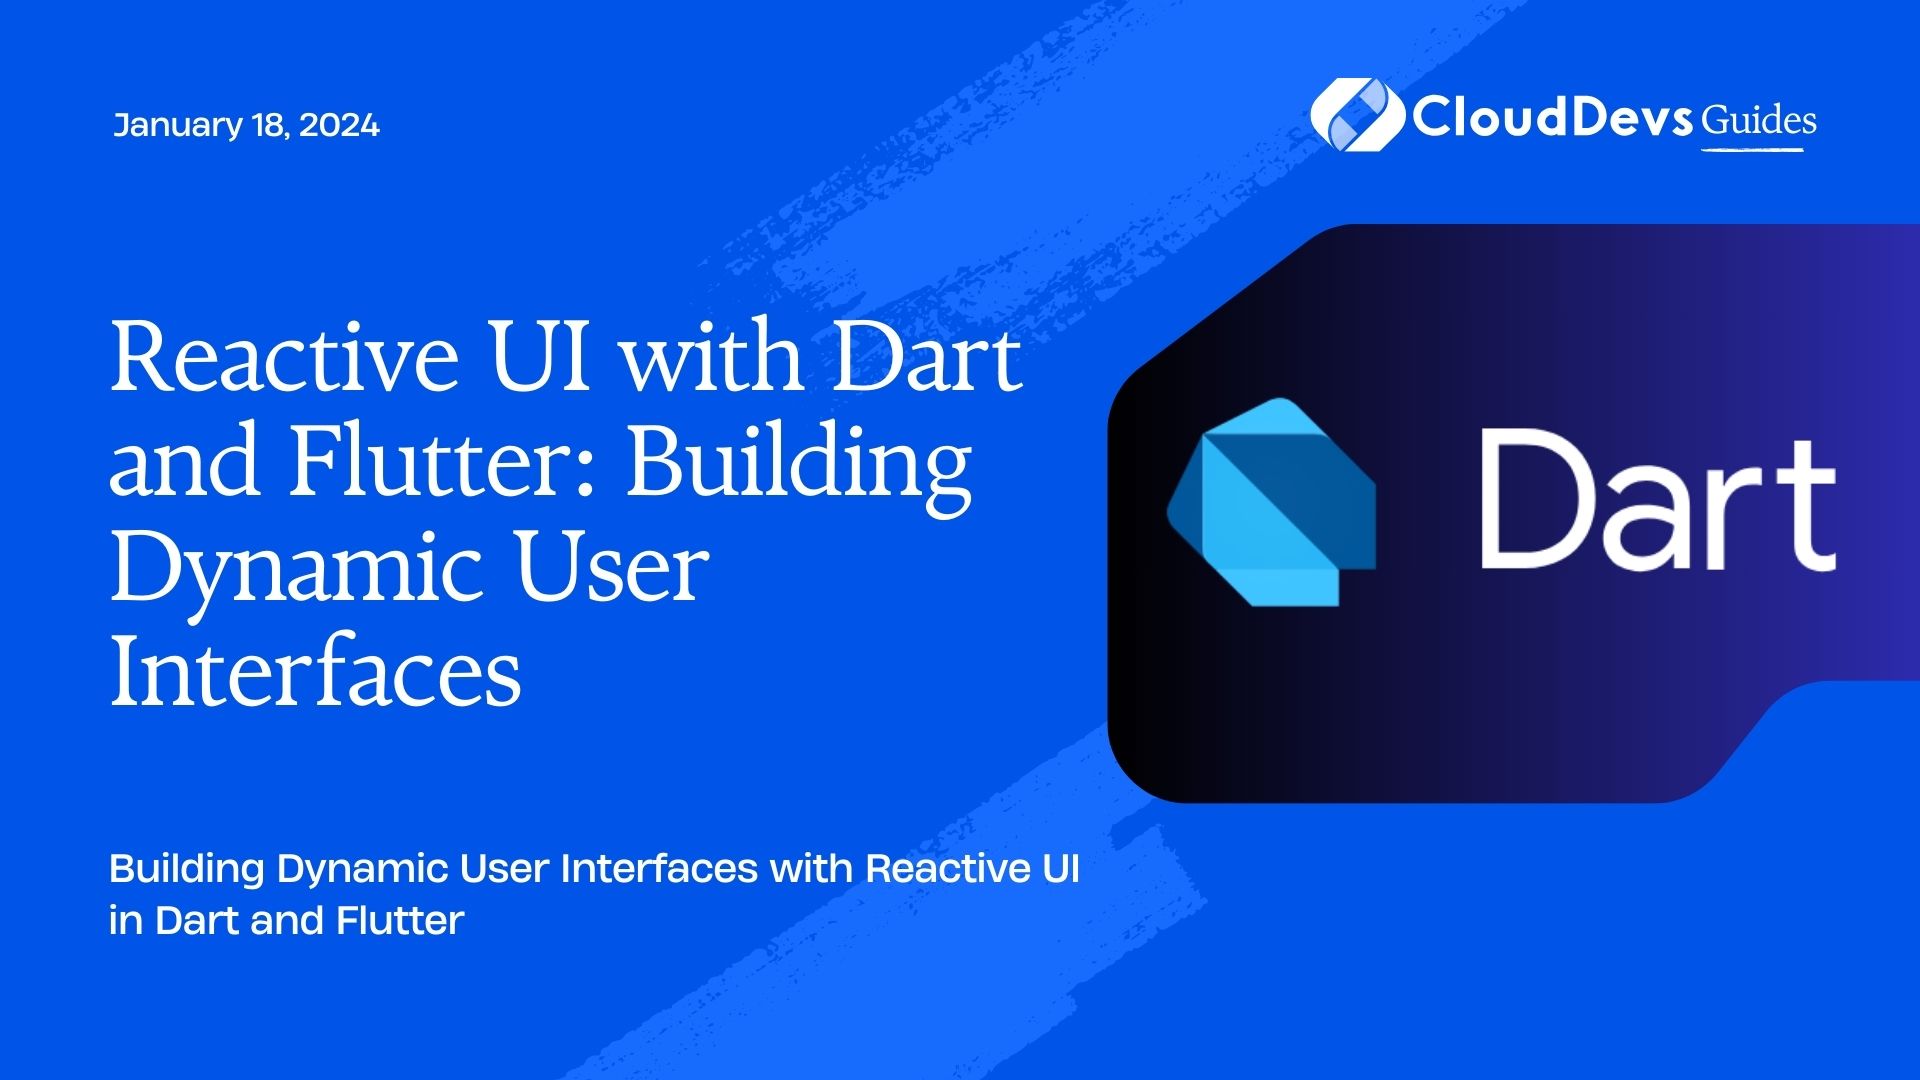 Reactive UI with Dart and Flutter: Building Dynamic User Interfaces